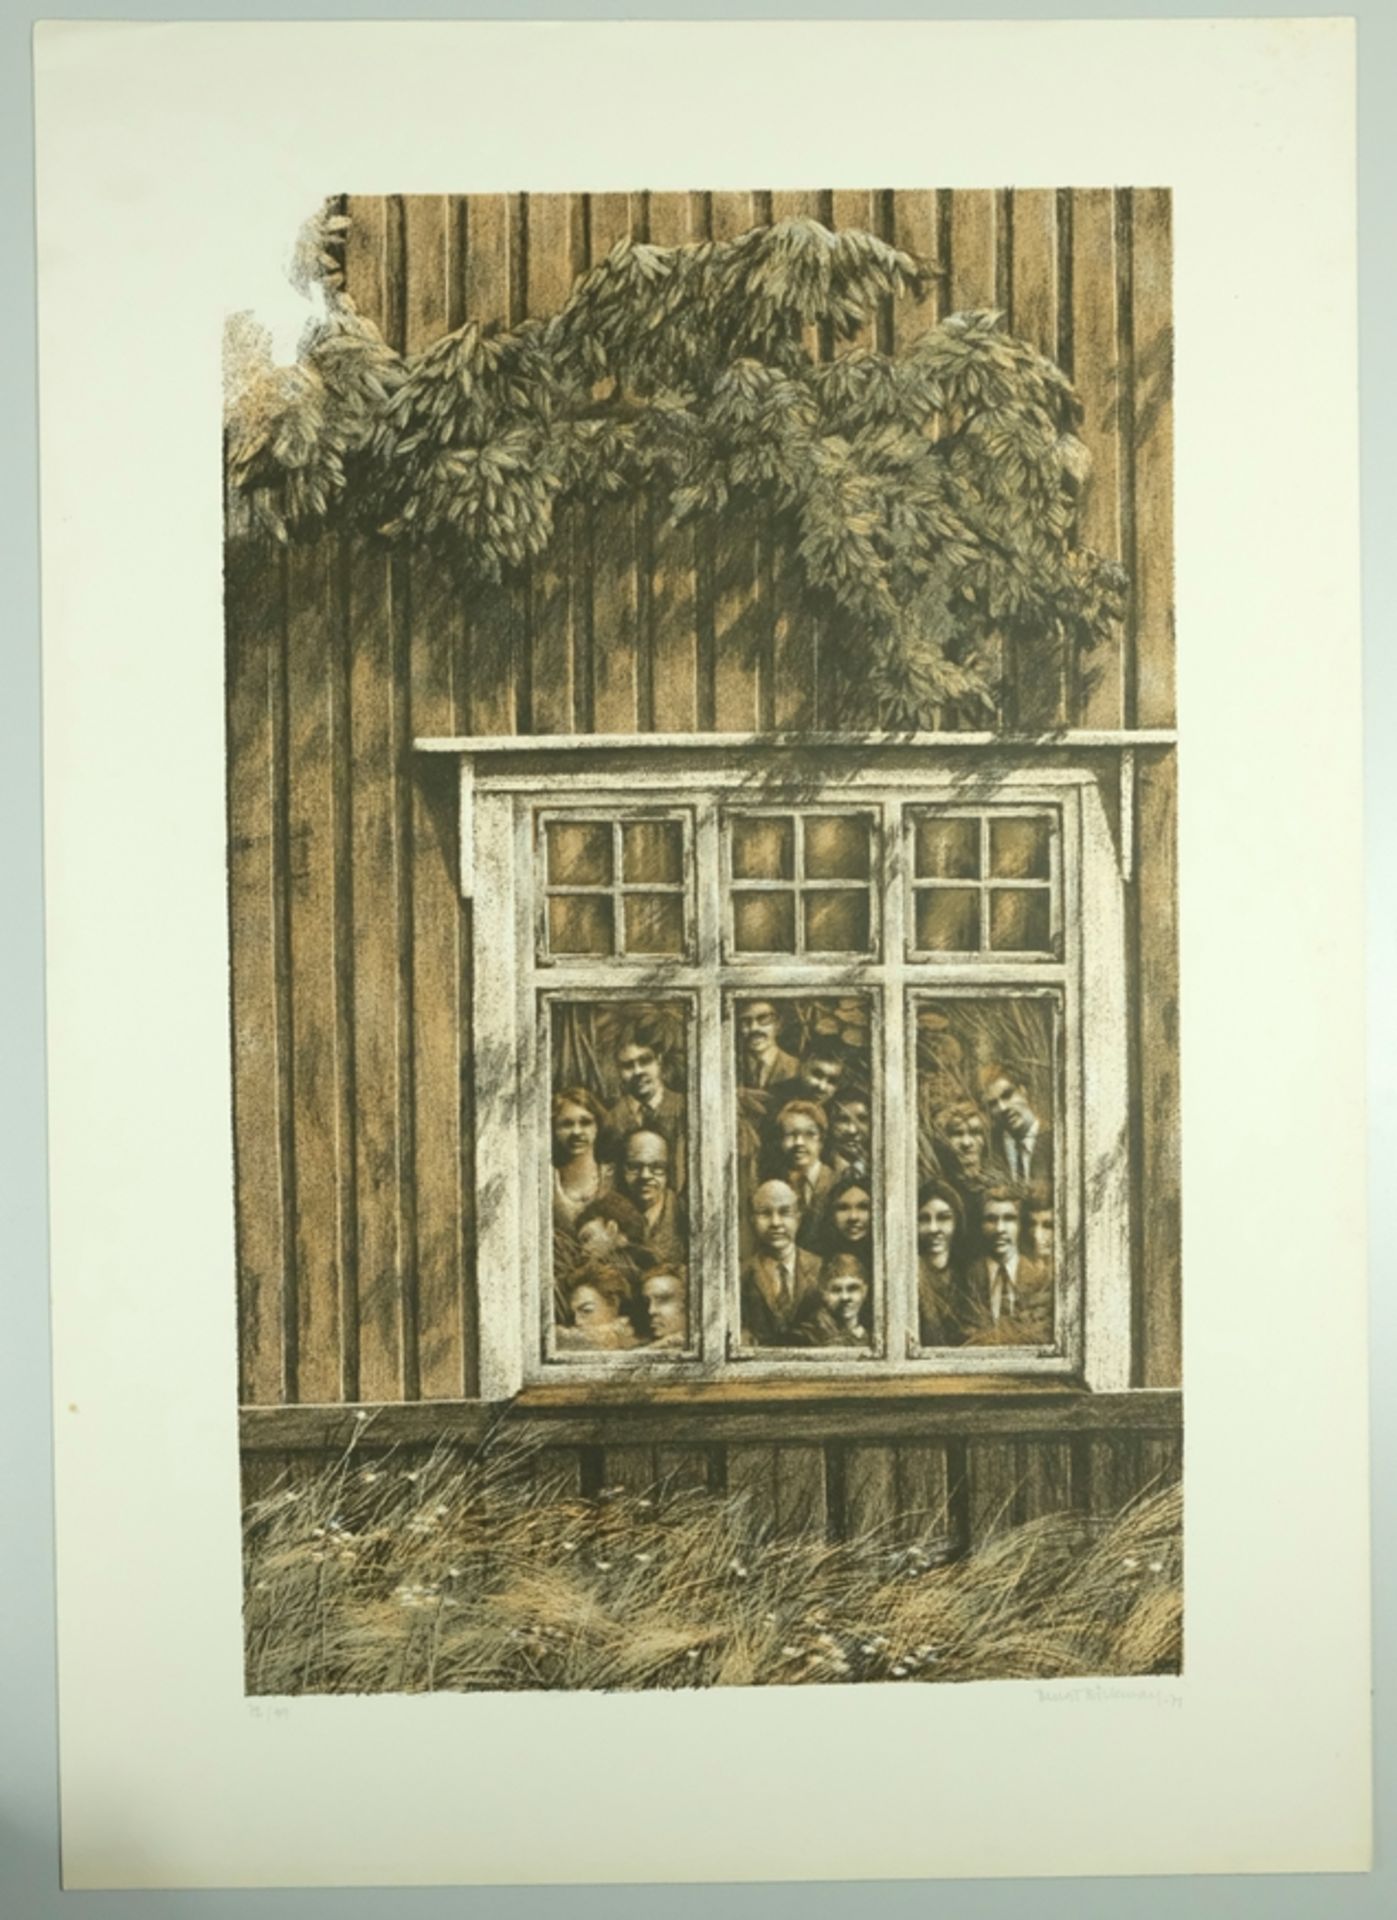 Böckmann, Bengt (born 1937) "Untitled", facade of a wooden house, large window from which 19 human  - Image 2 of 5